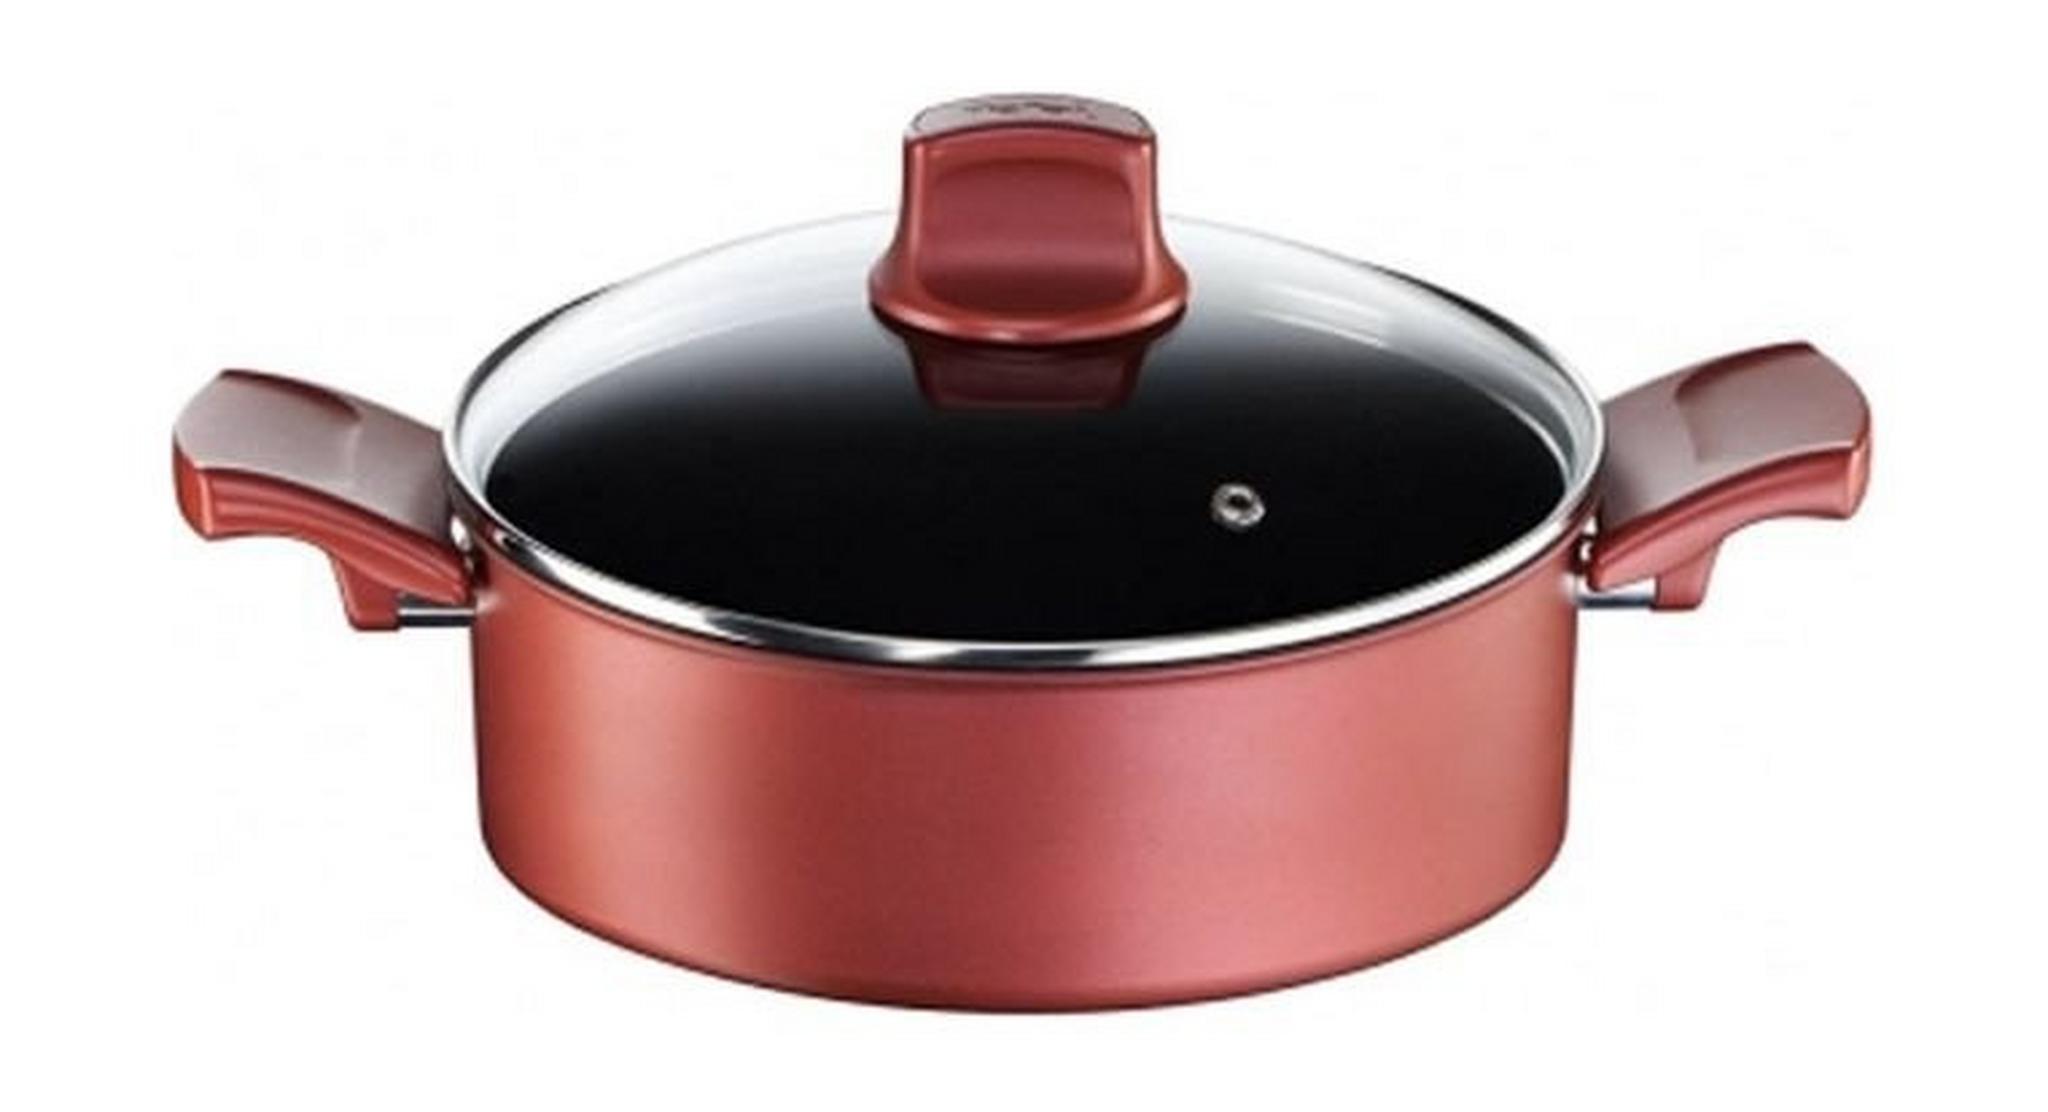 Tefal 24cm Character Dutch Oven Pot - Rio Red